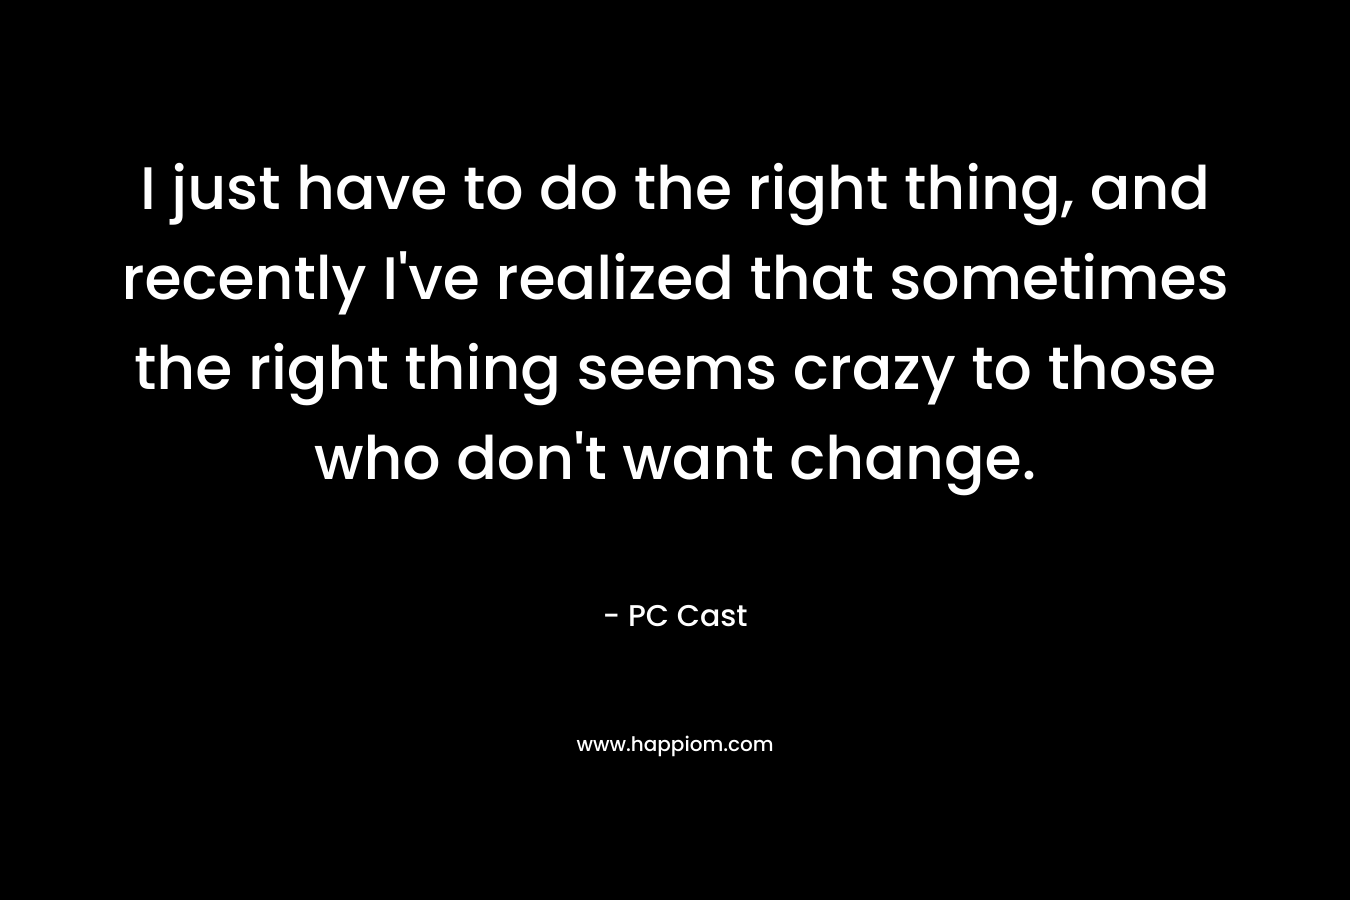 I just have to do the right thing, and recently I’ve realized that sometimes the right thing seems crazy to those who don’t want change. – PC Cast